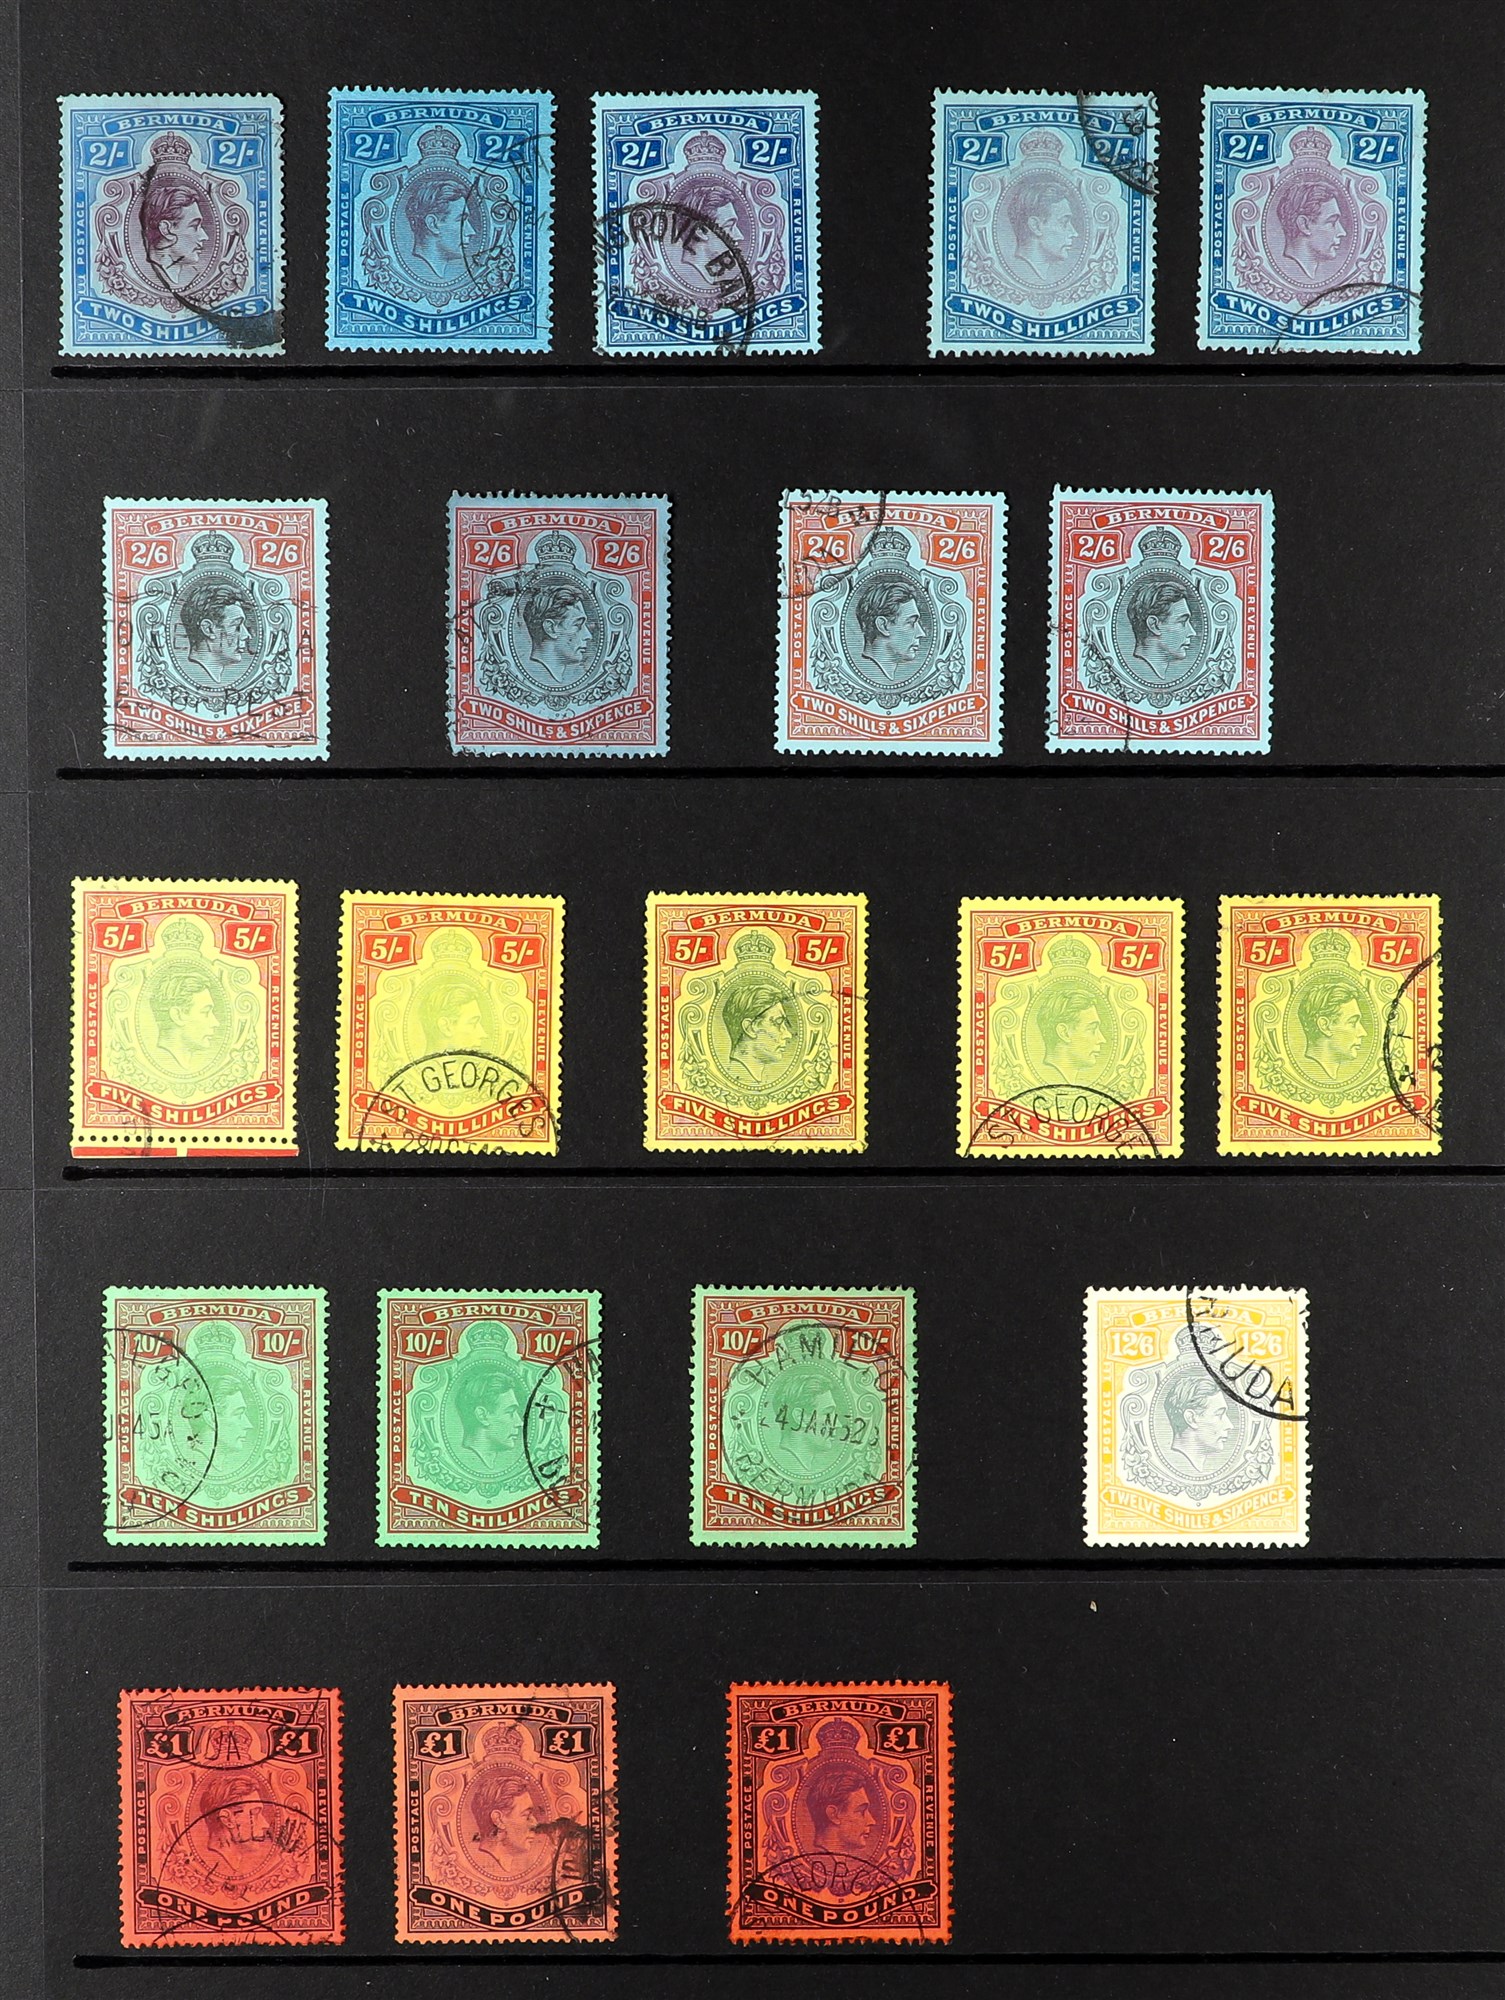 BERMUDA 1938-53 LARGE KEY TYPES USED COLLECTION with 2s perf 14 (3, shades) and perf 13 (both listed